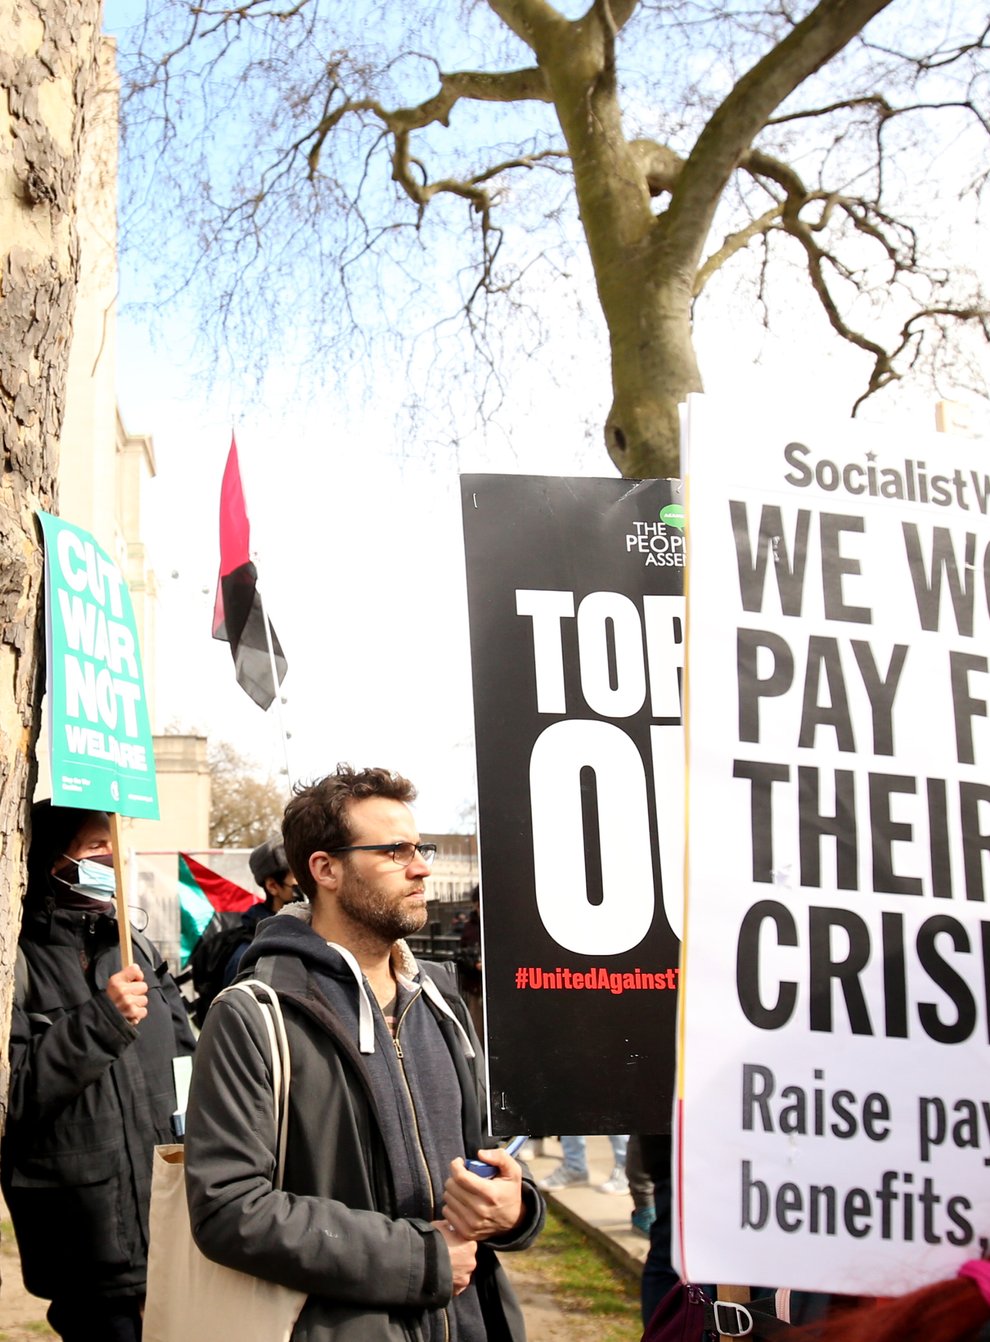 Protesters near Downing Street in central London, at The People’s Assembly Against Austerity protest to highlight those suffering hardship from the cost of living crisis due to the rise in fuel costs, food prices inflation and low pay. Picture date: Saturday April 2, 2022.